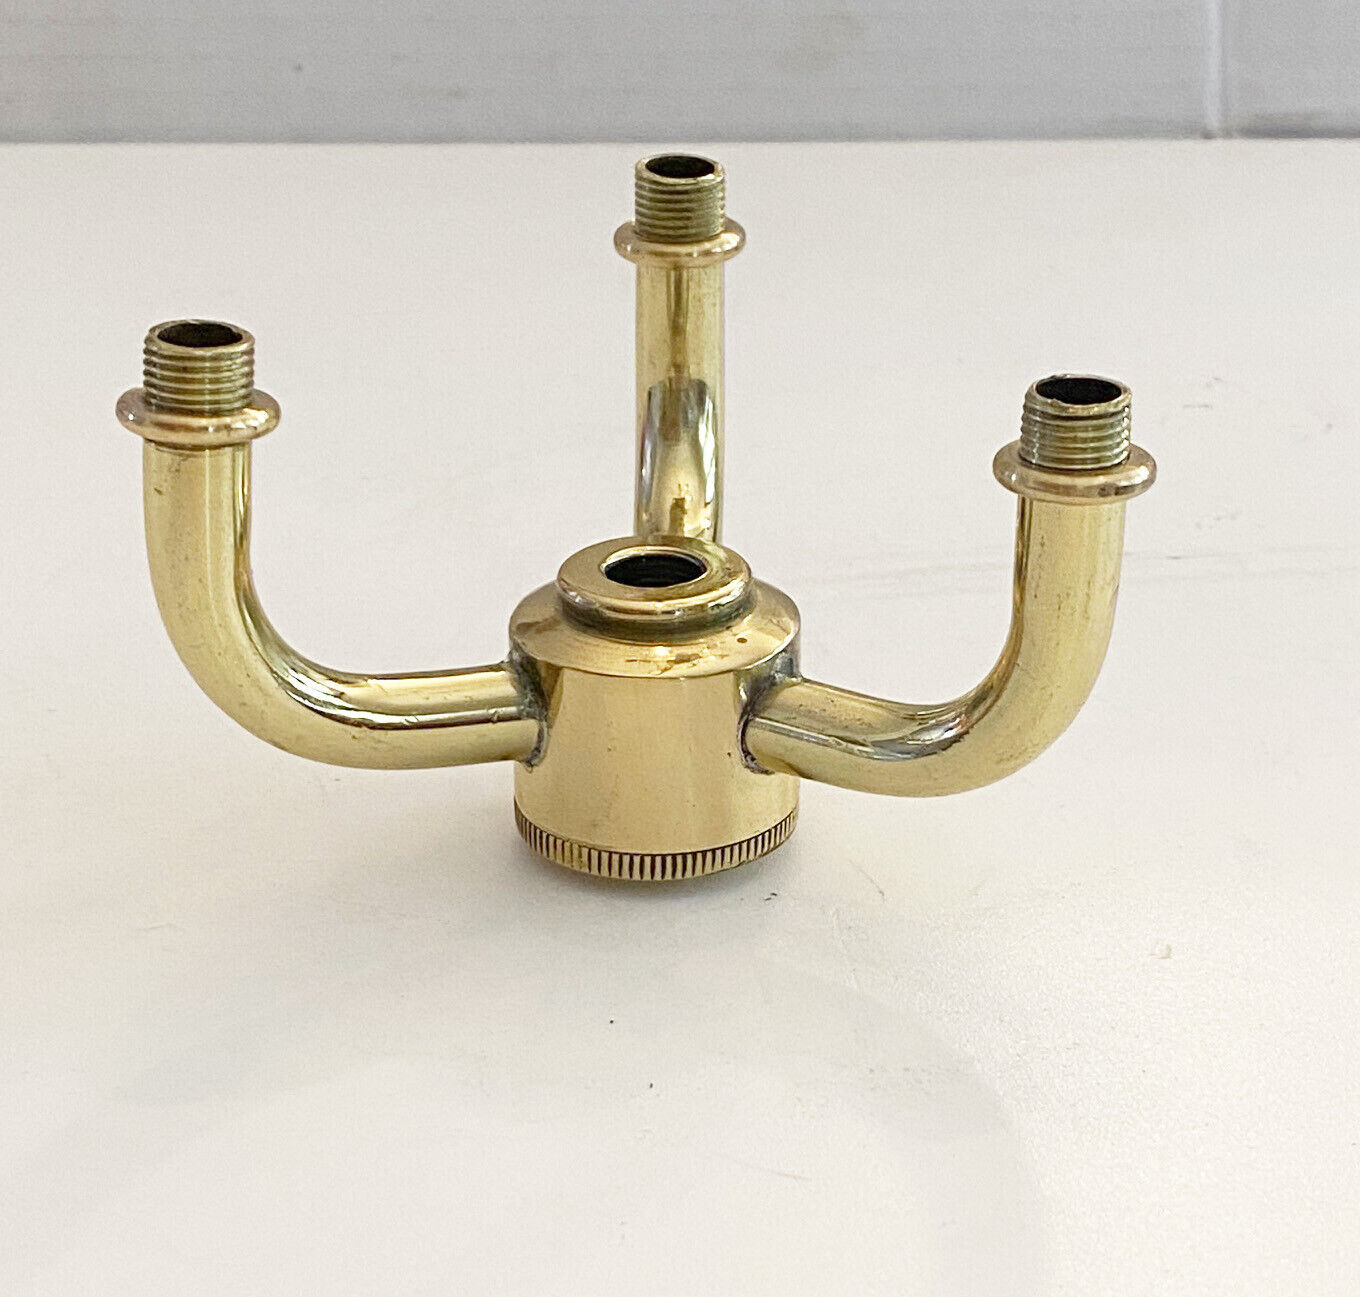 New: Solid Brass 3-Arm Cluster Body Polished & lacquered lamp part